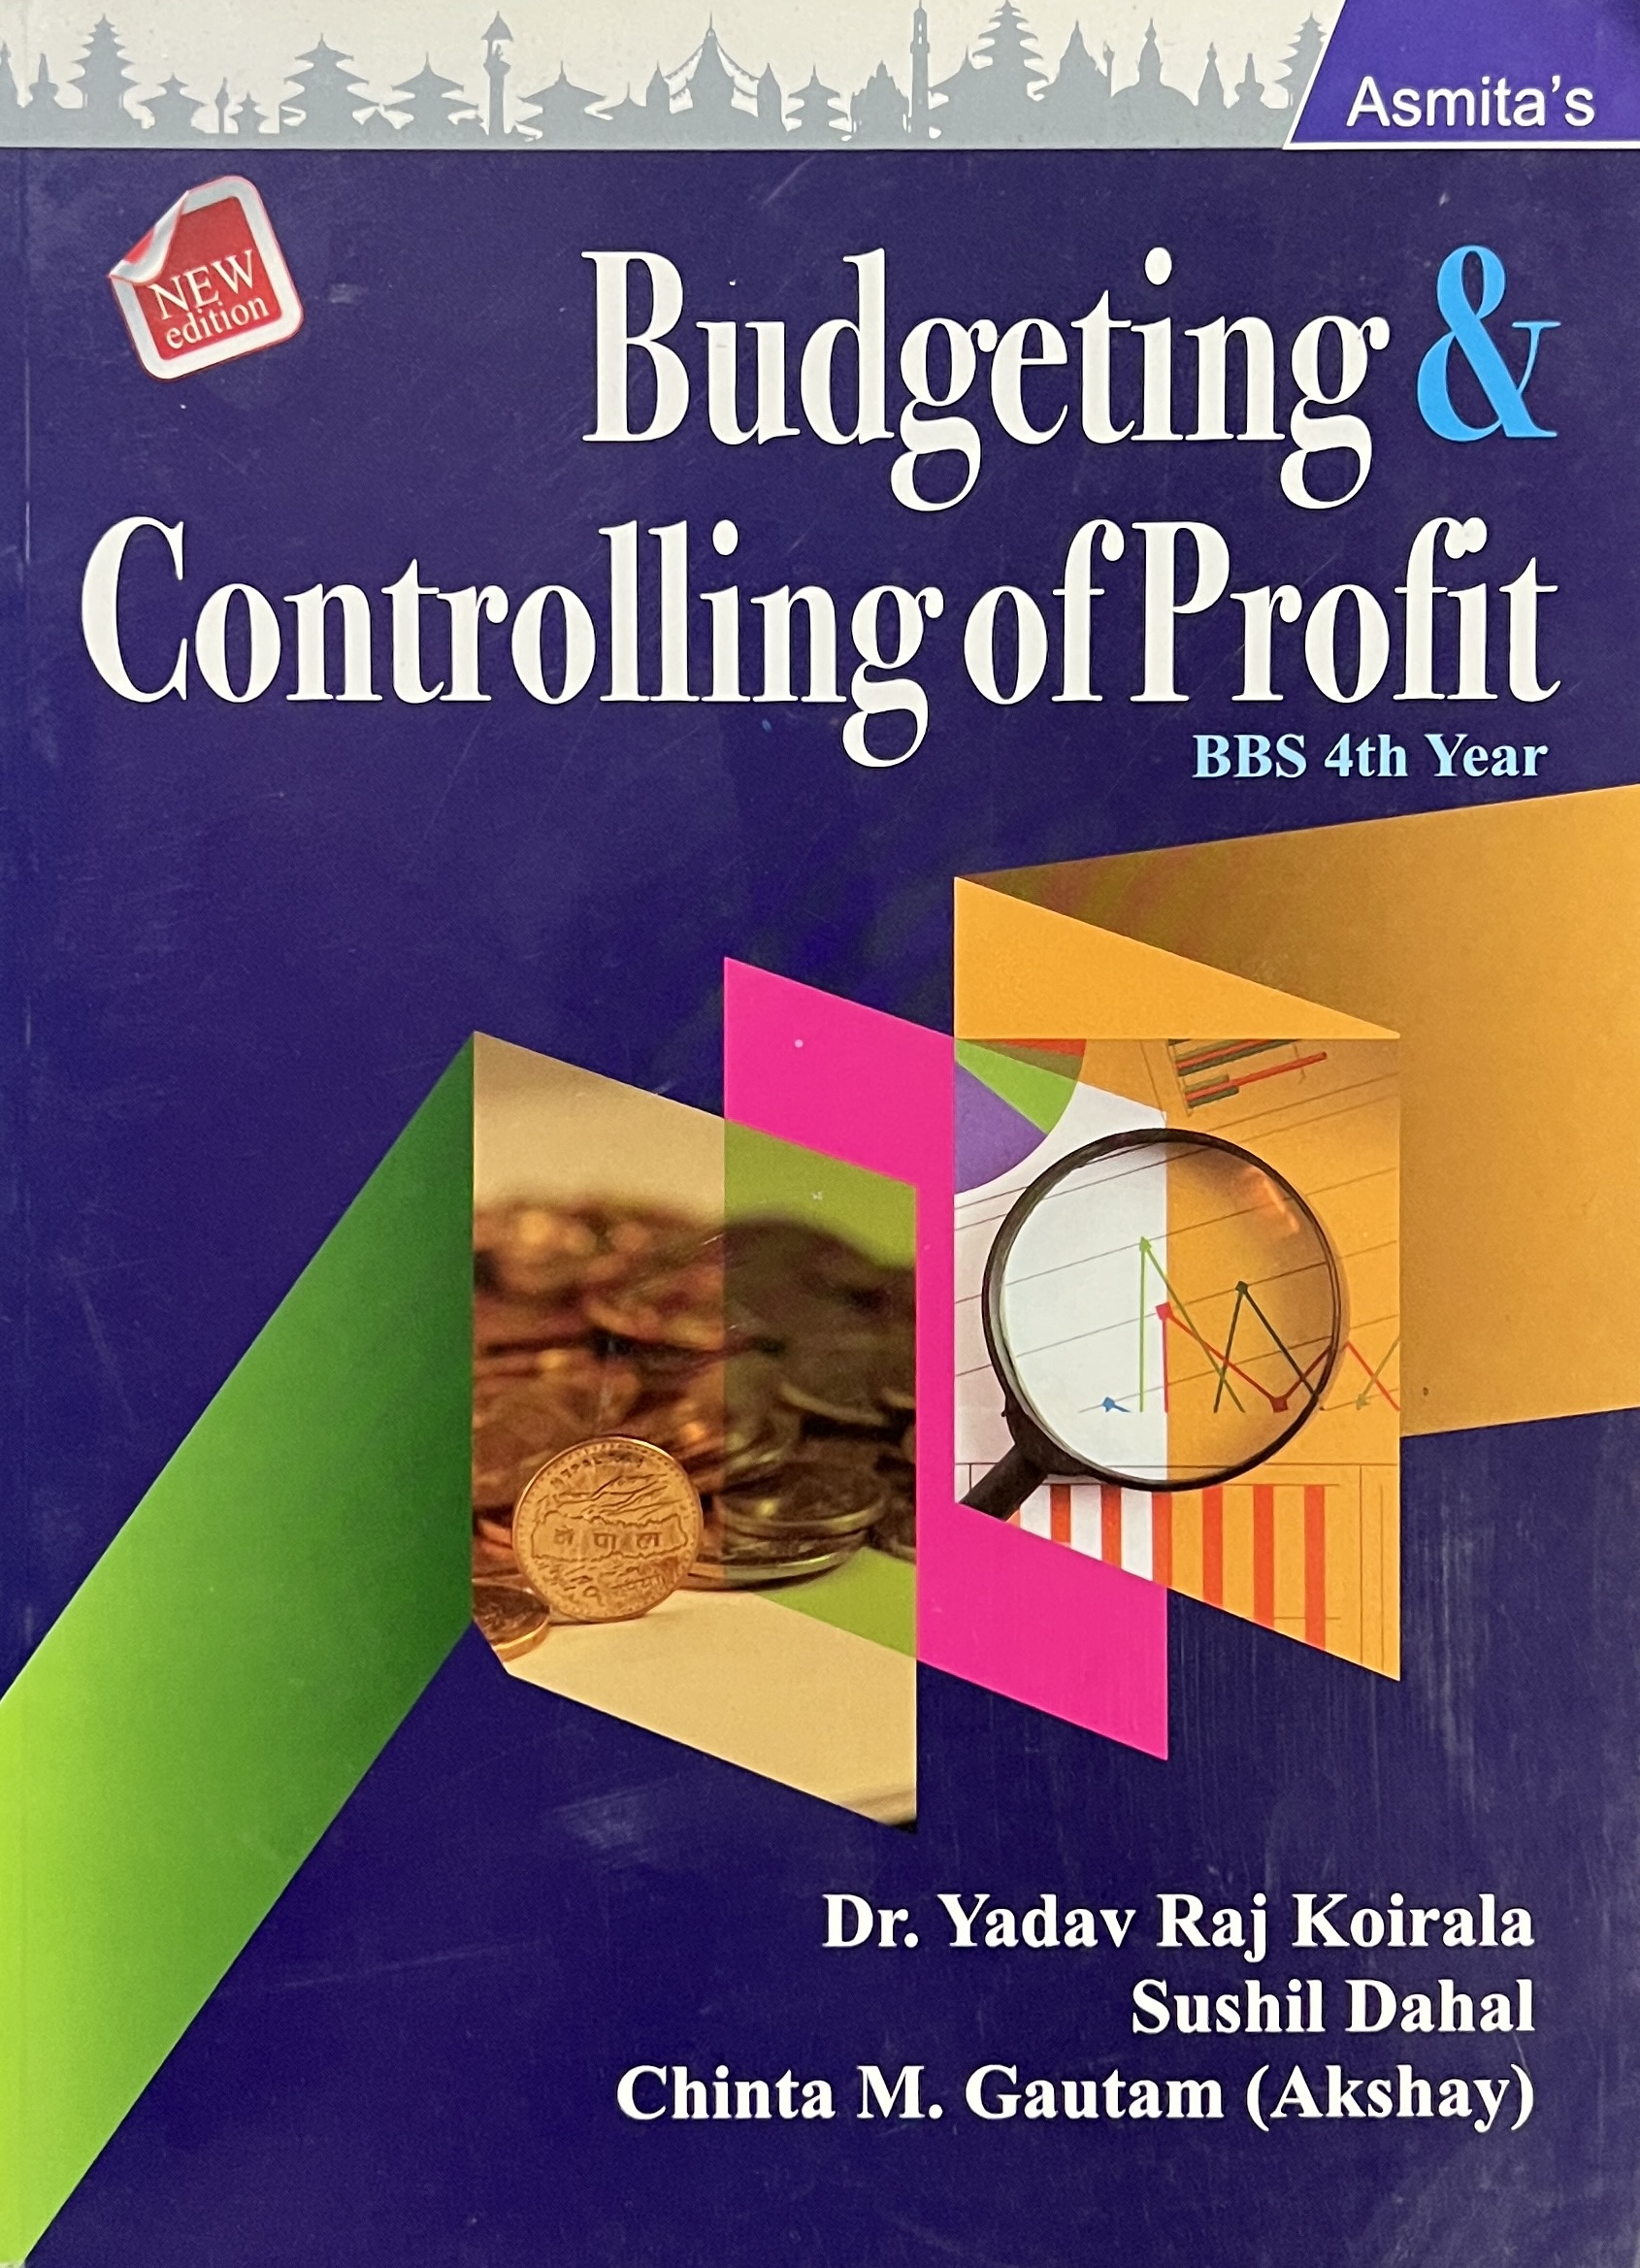 Budgeting & Controlling of Profit - BBS 4th Year - English